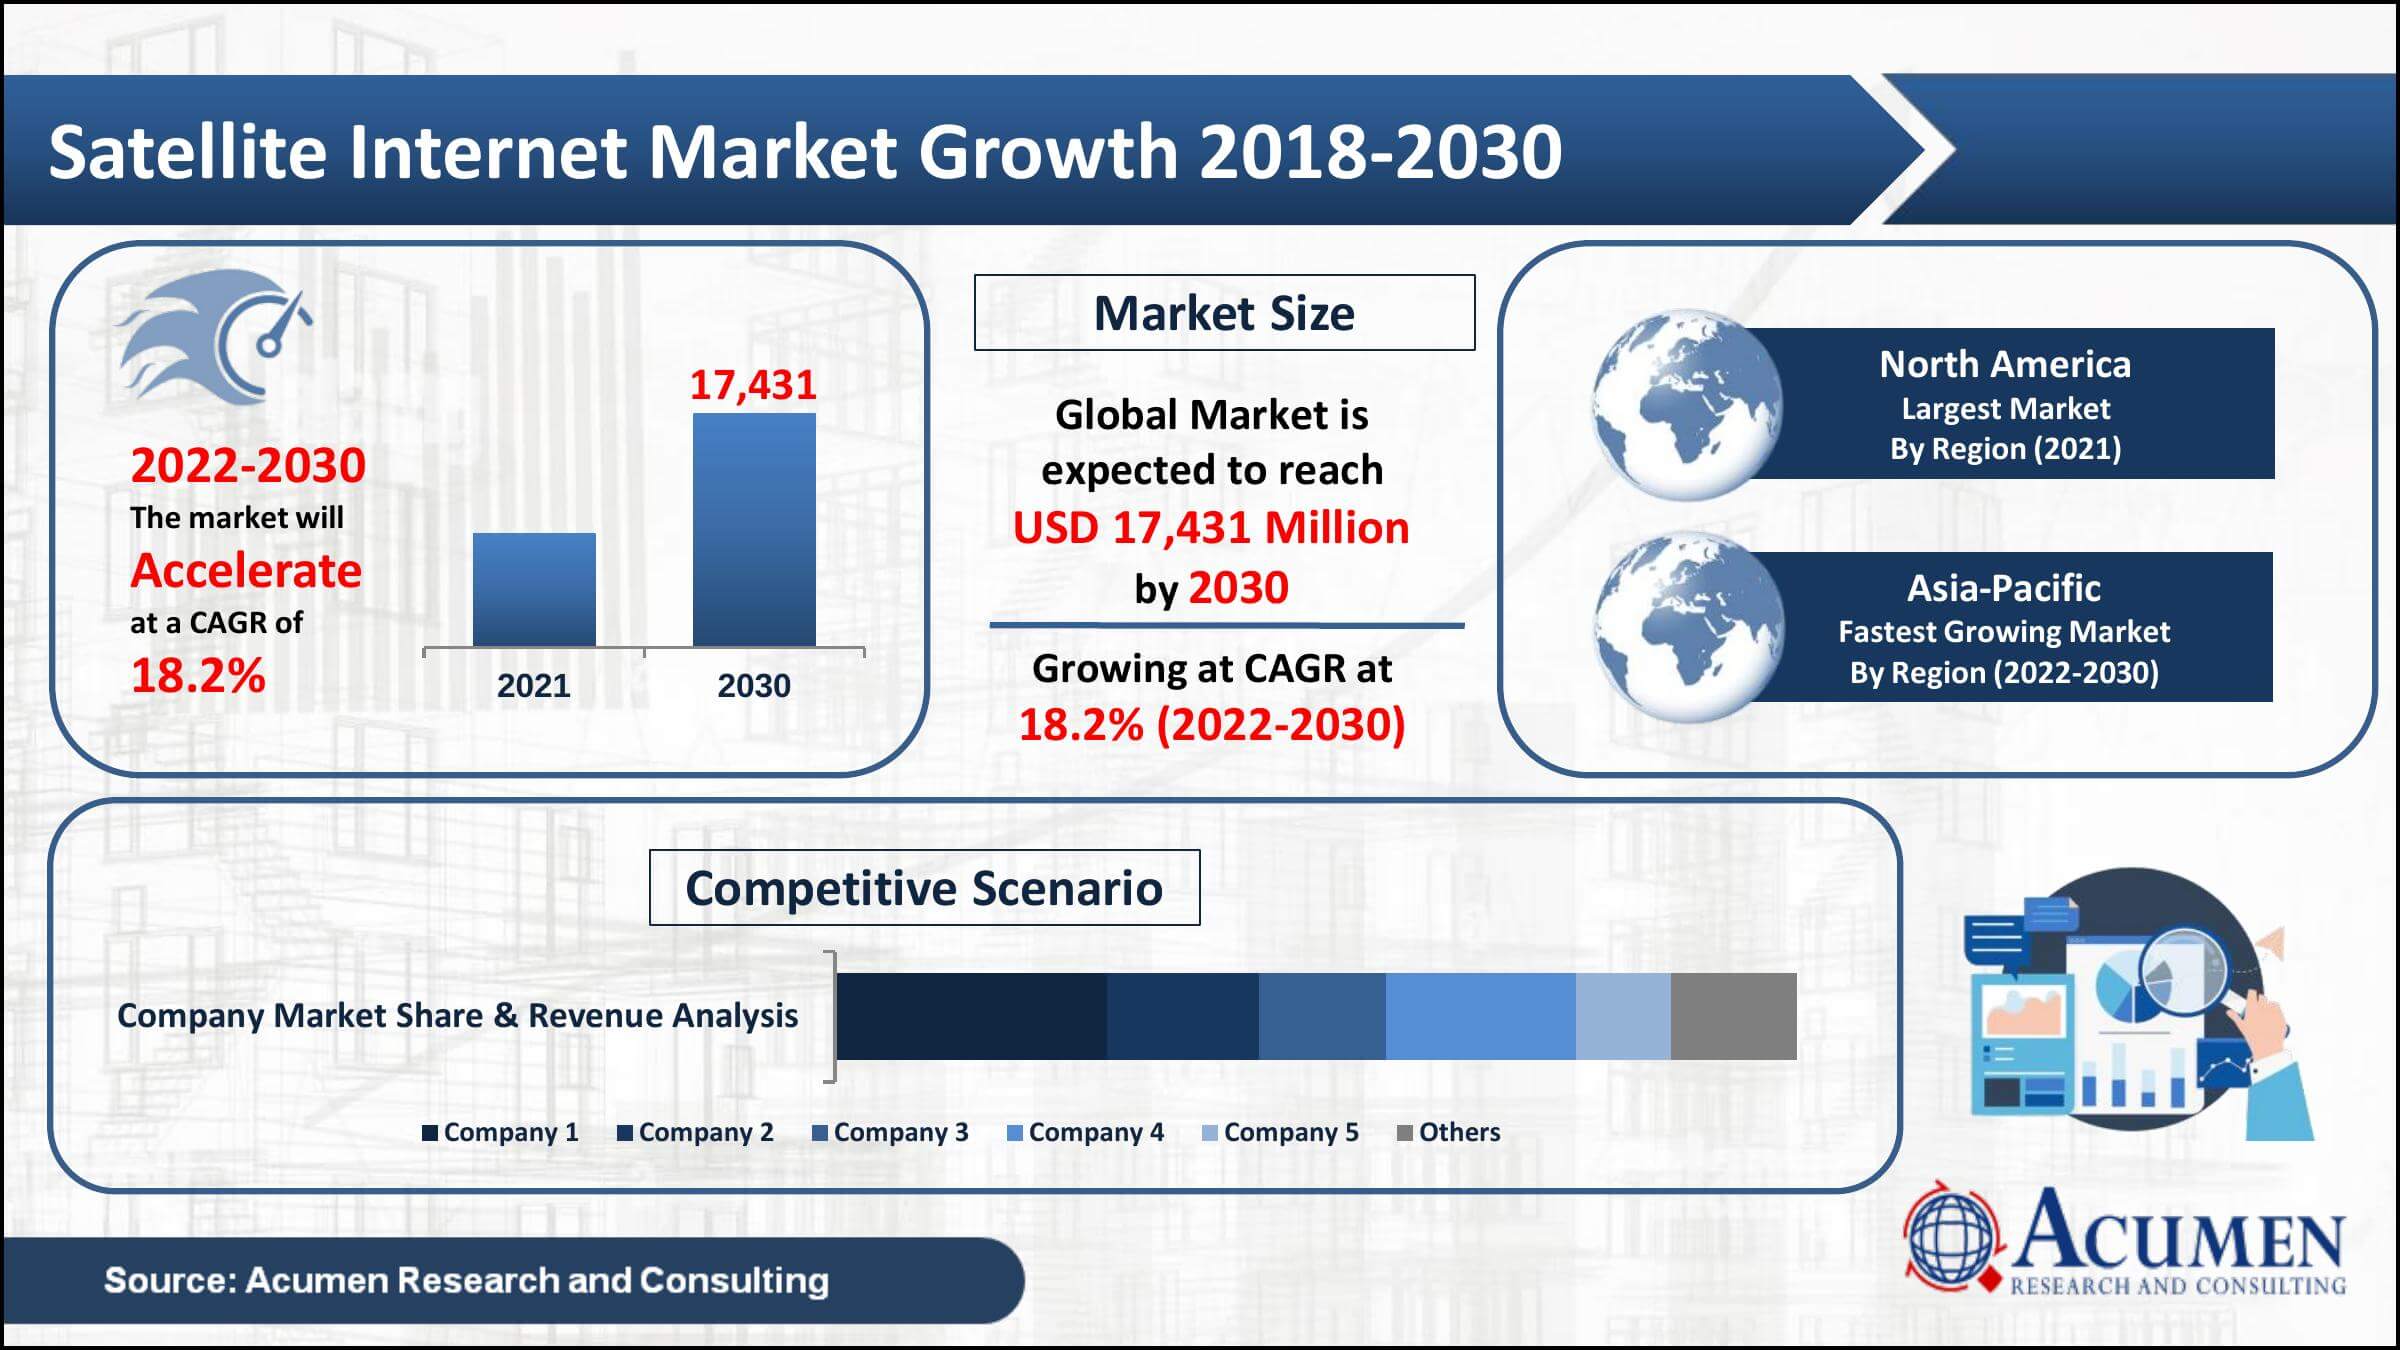 Satellite Internet Market value set to reach USD 17,431 Million by year 2030 at 18.2% CAGR